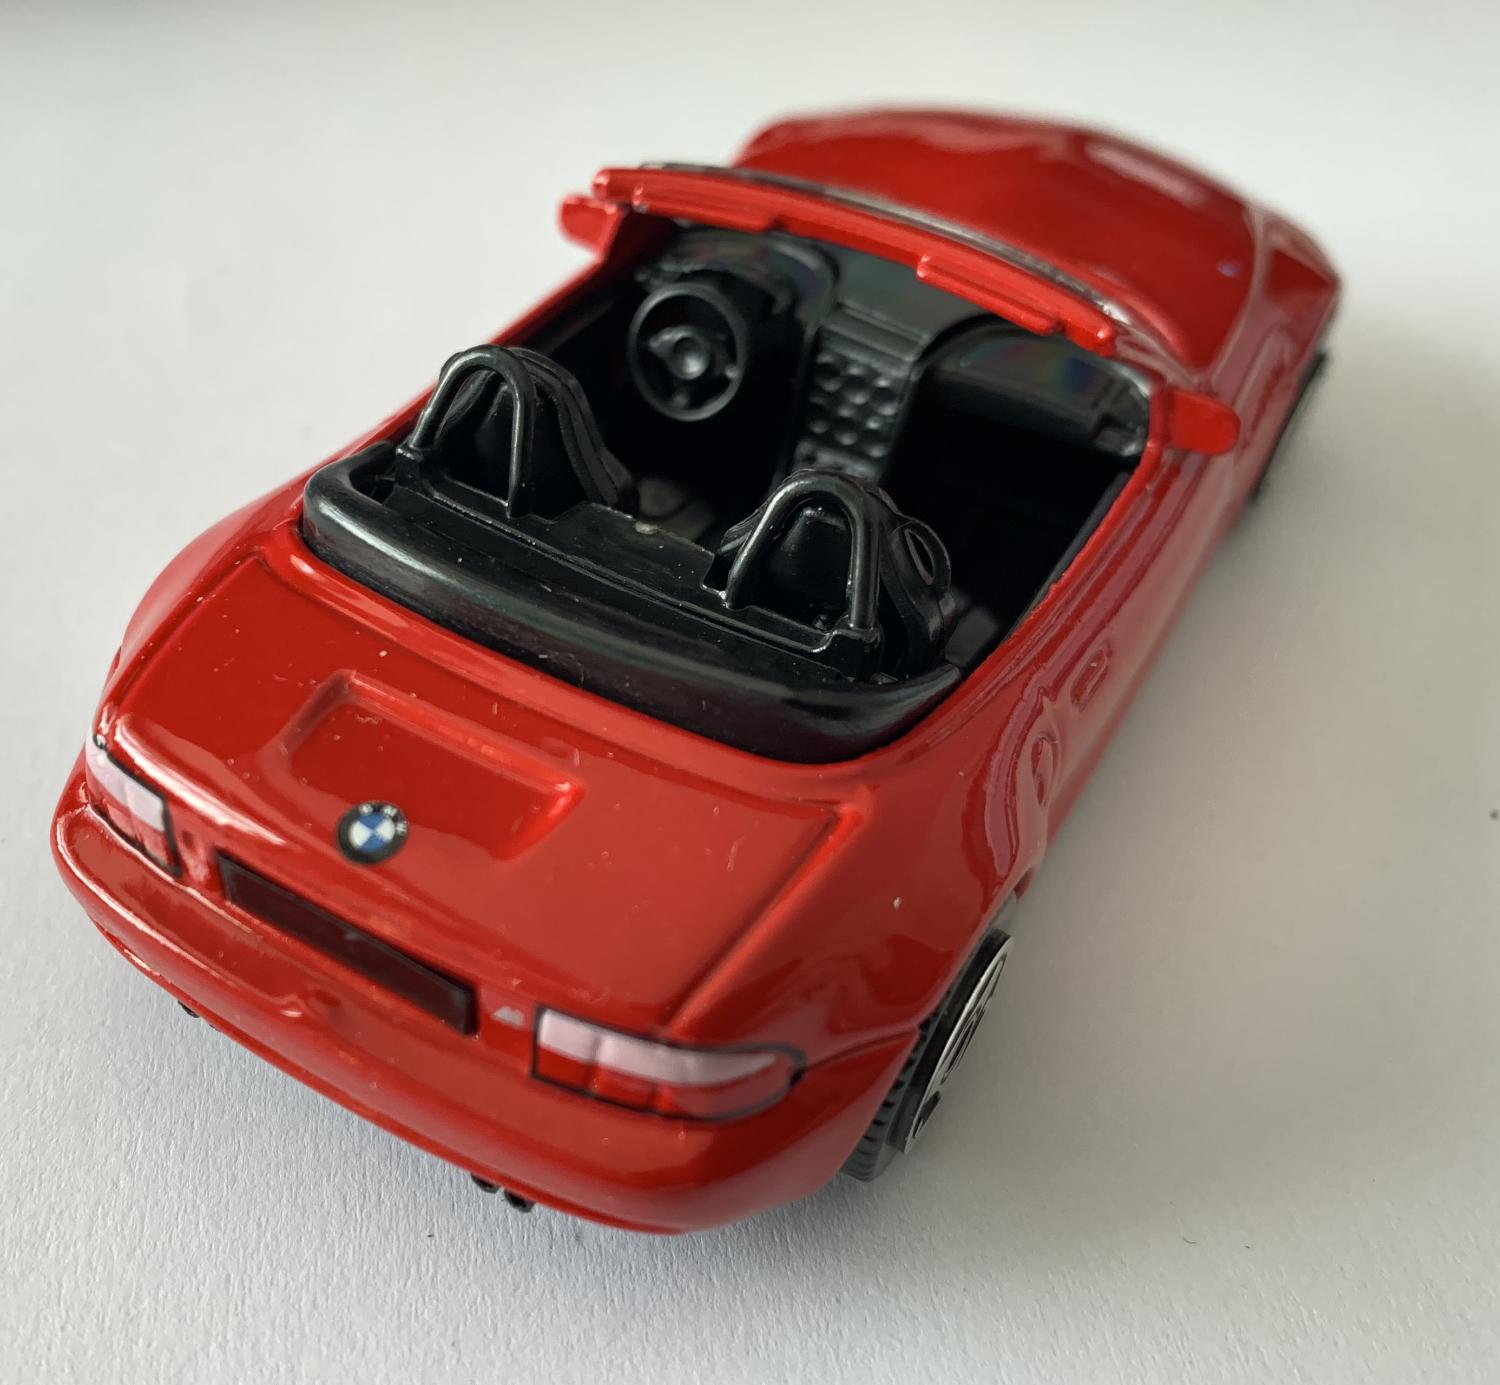 BMW MRoadster in red 1:43 scale model from Bburago, streetfire